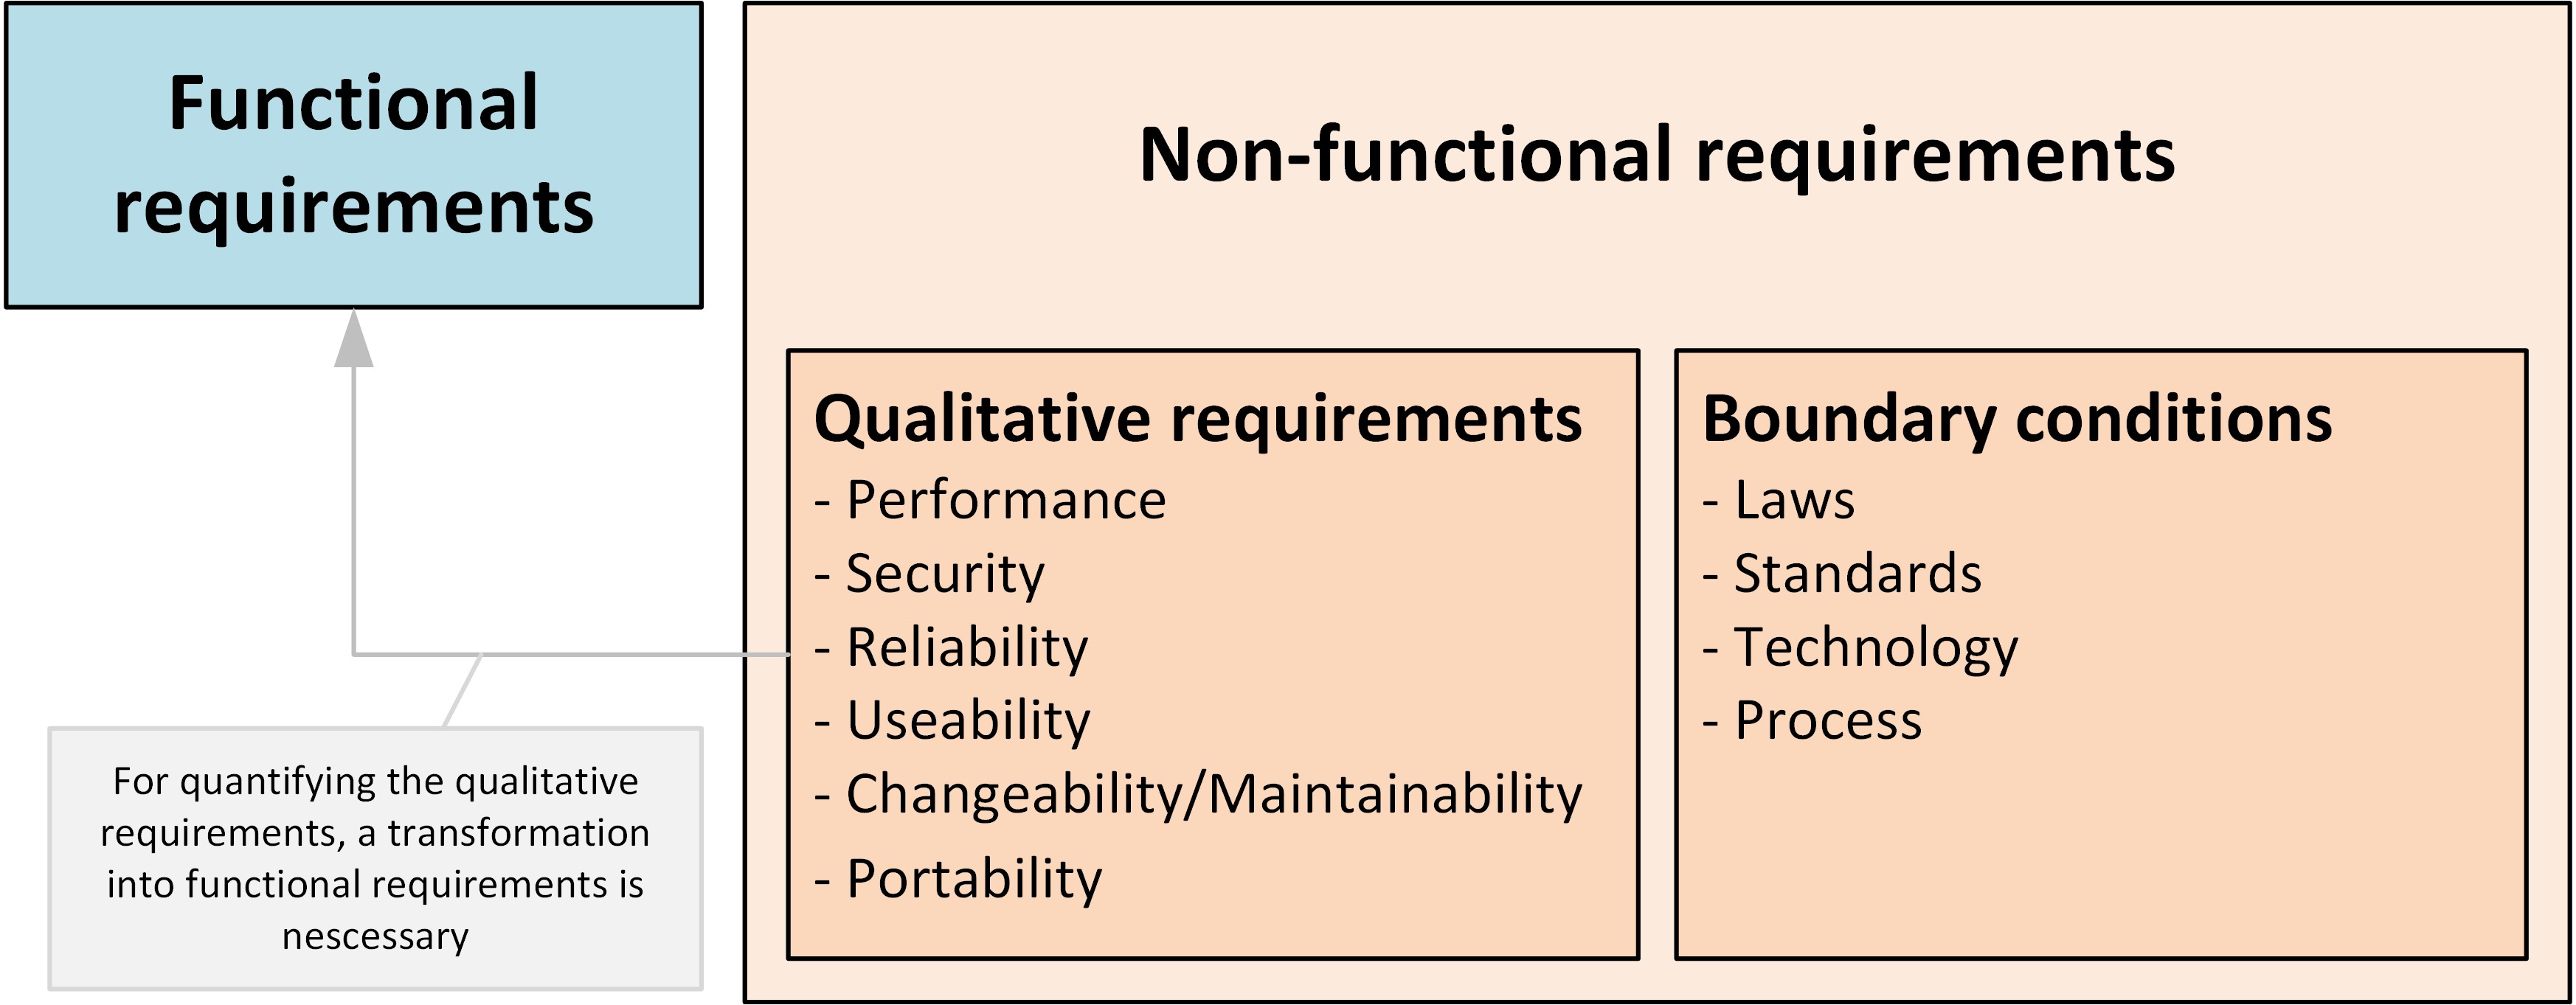 functional requirements